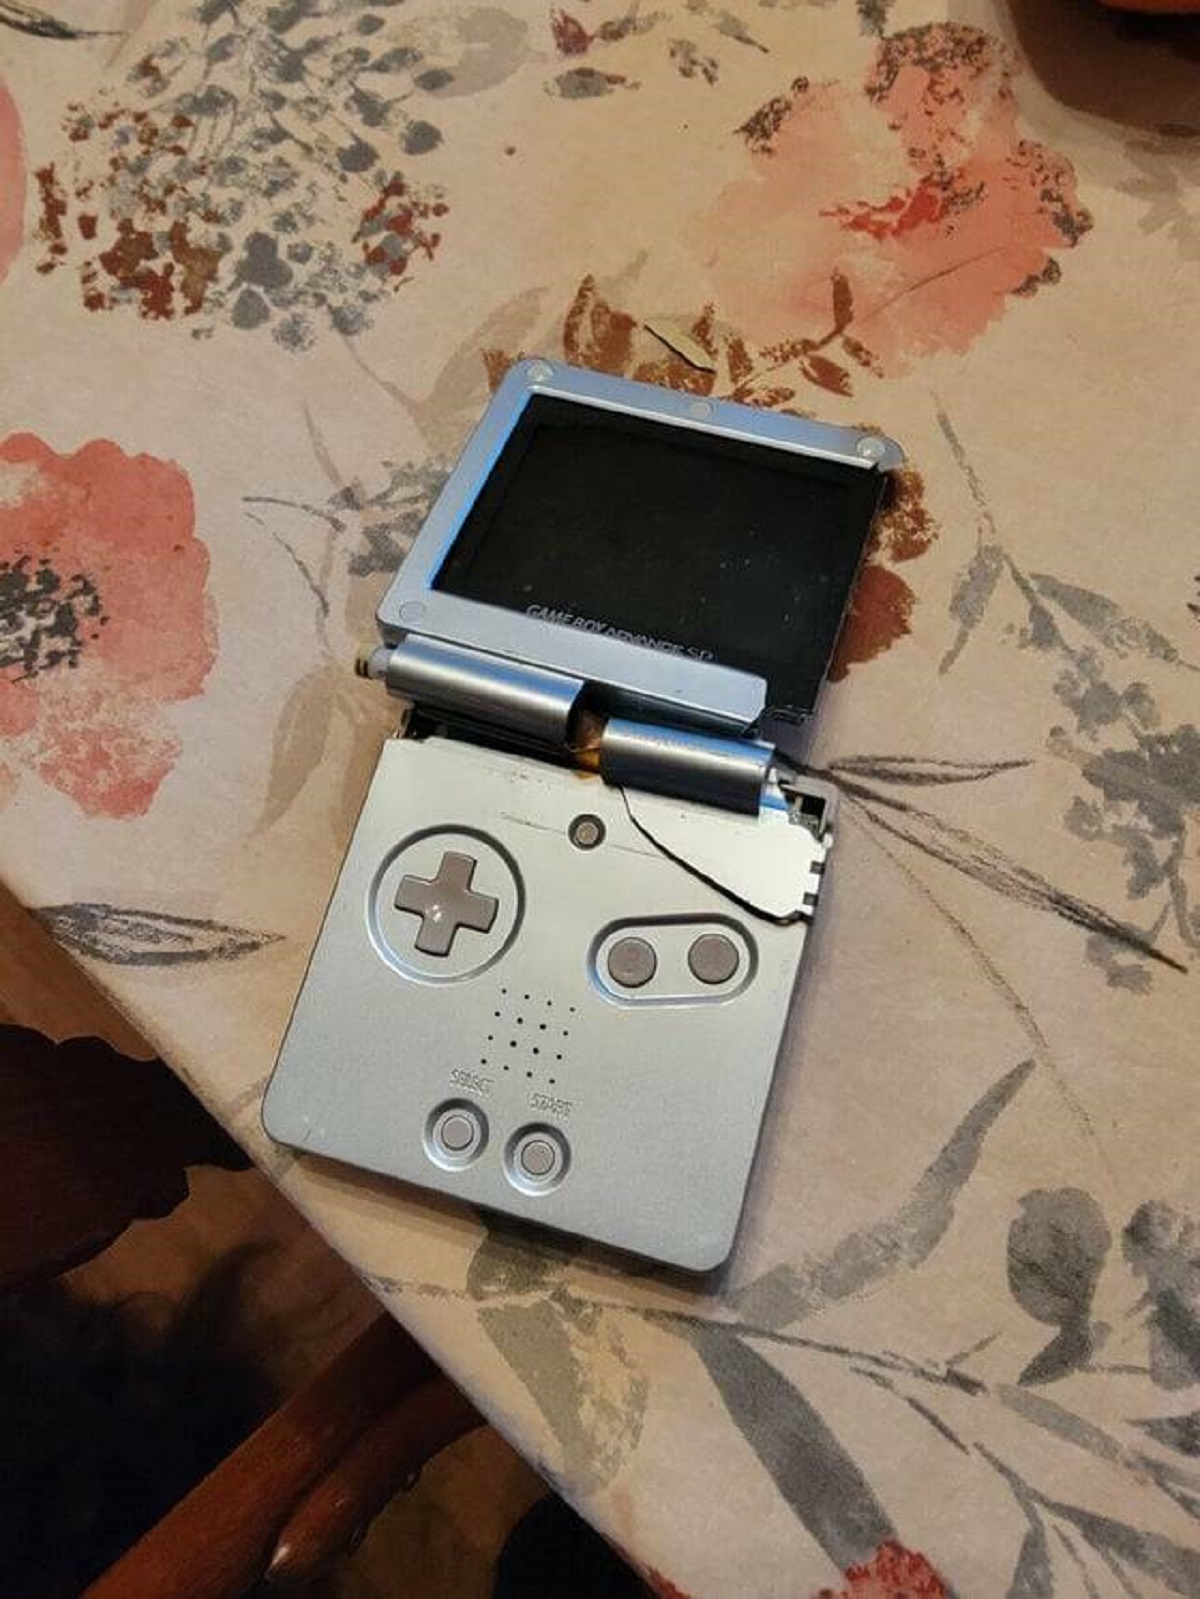 "Was really happy to find my Gameboy this morning."